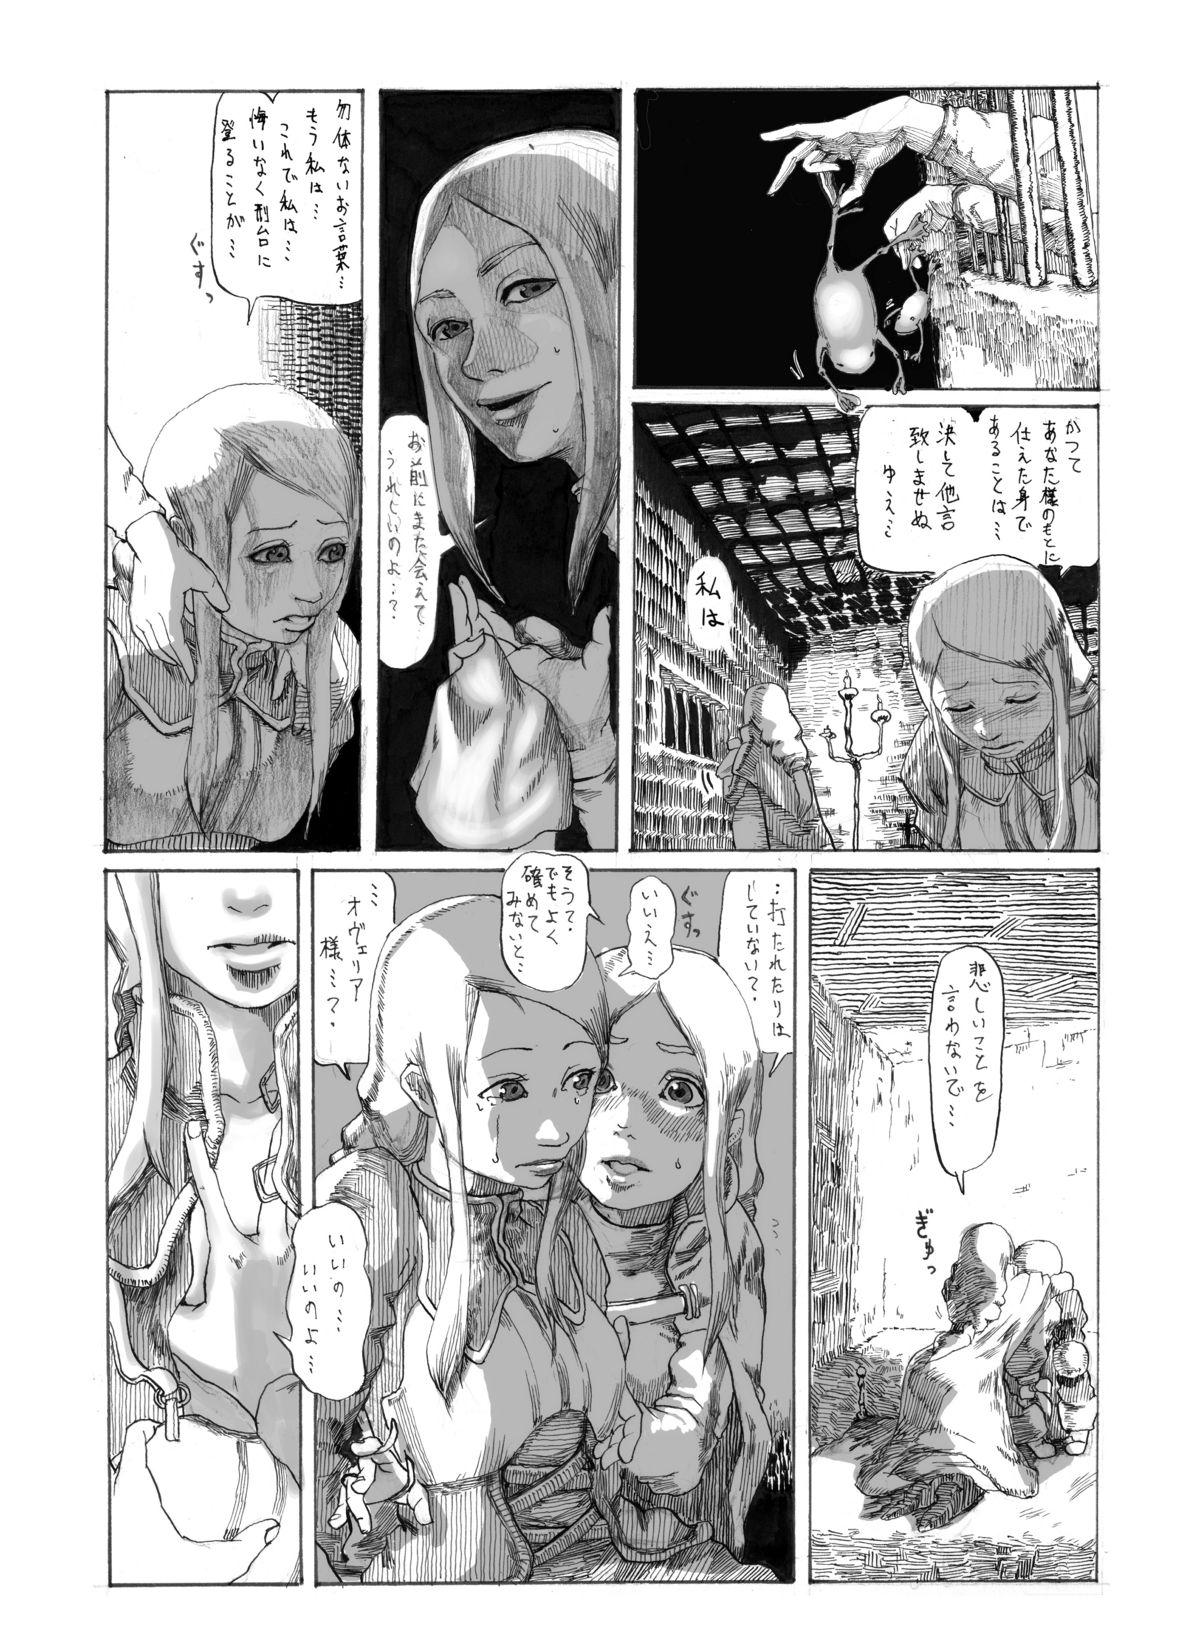 Old And Young Ove no Yome - Final fantasy tactics Penis - Page 5